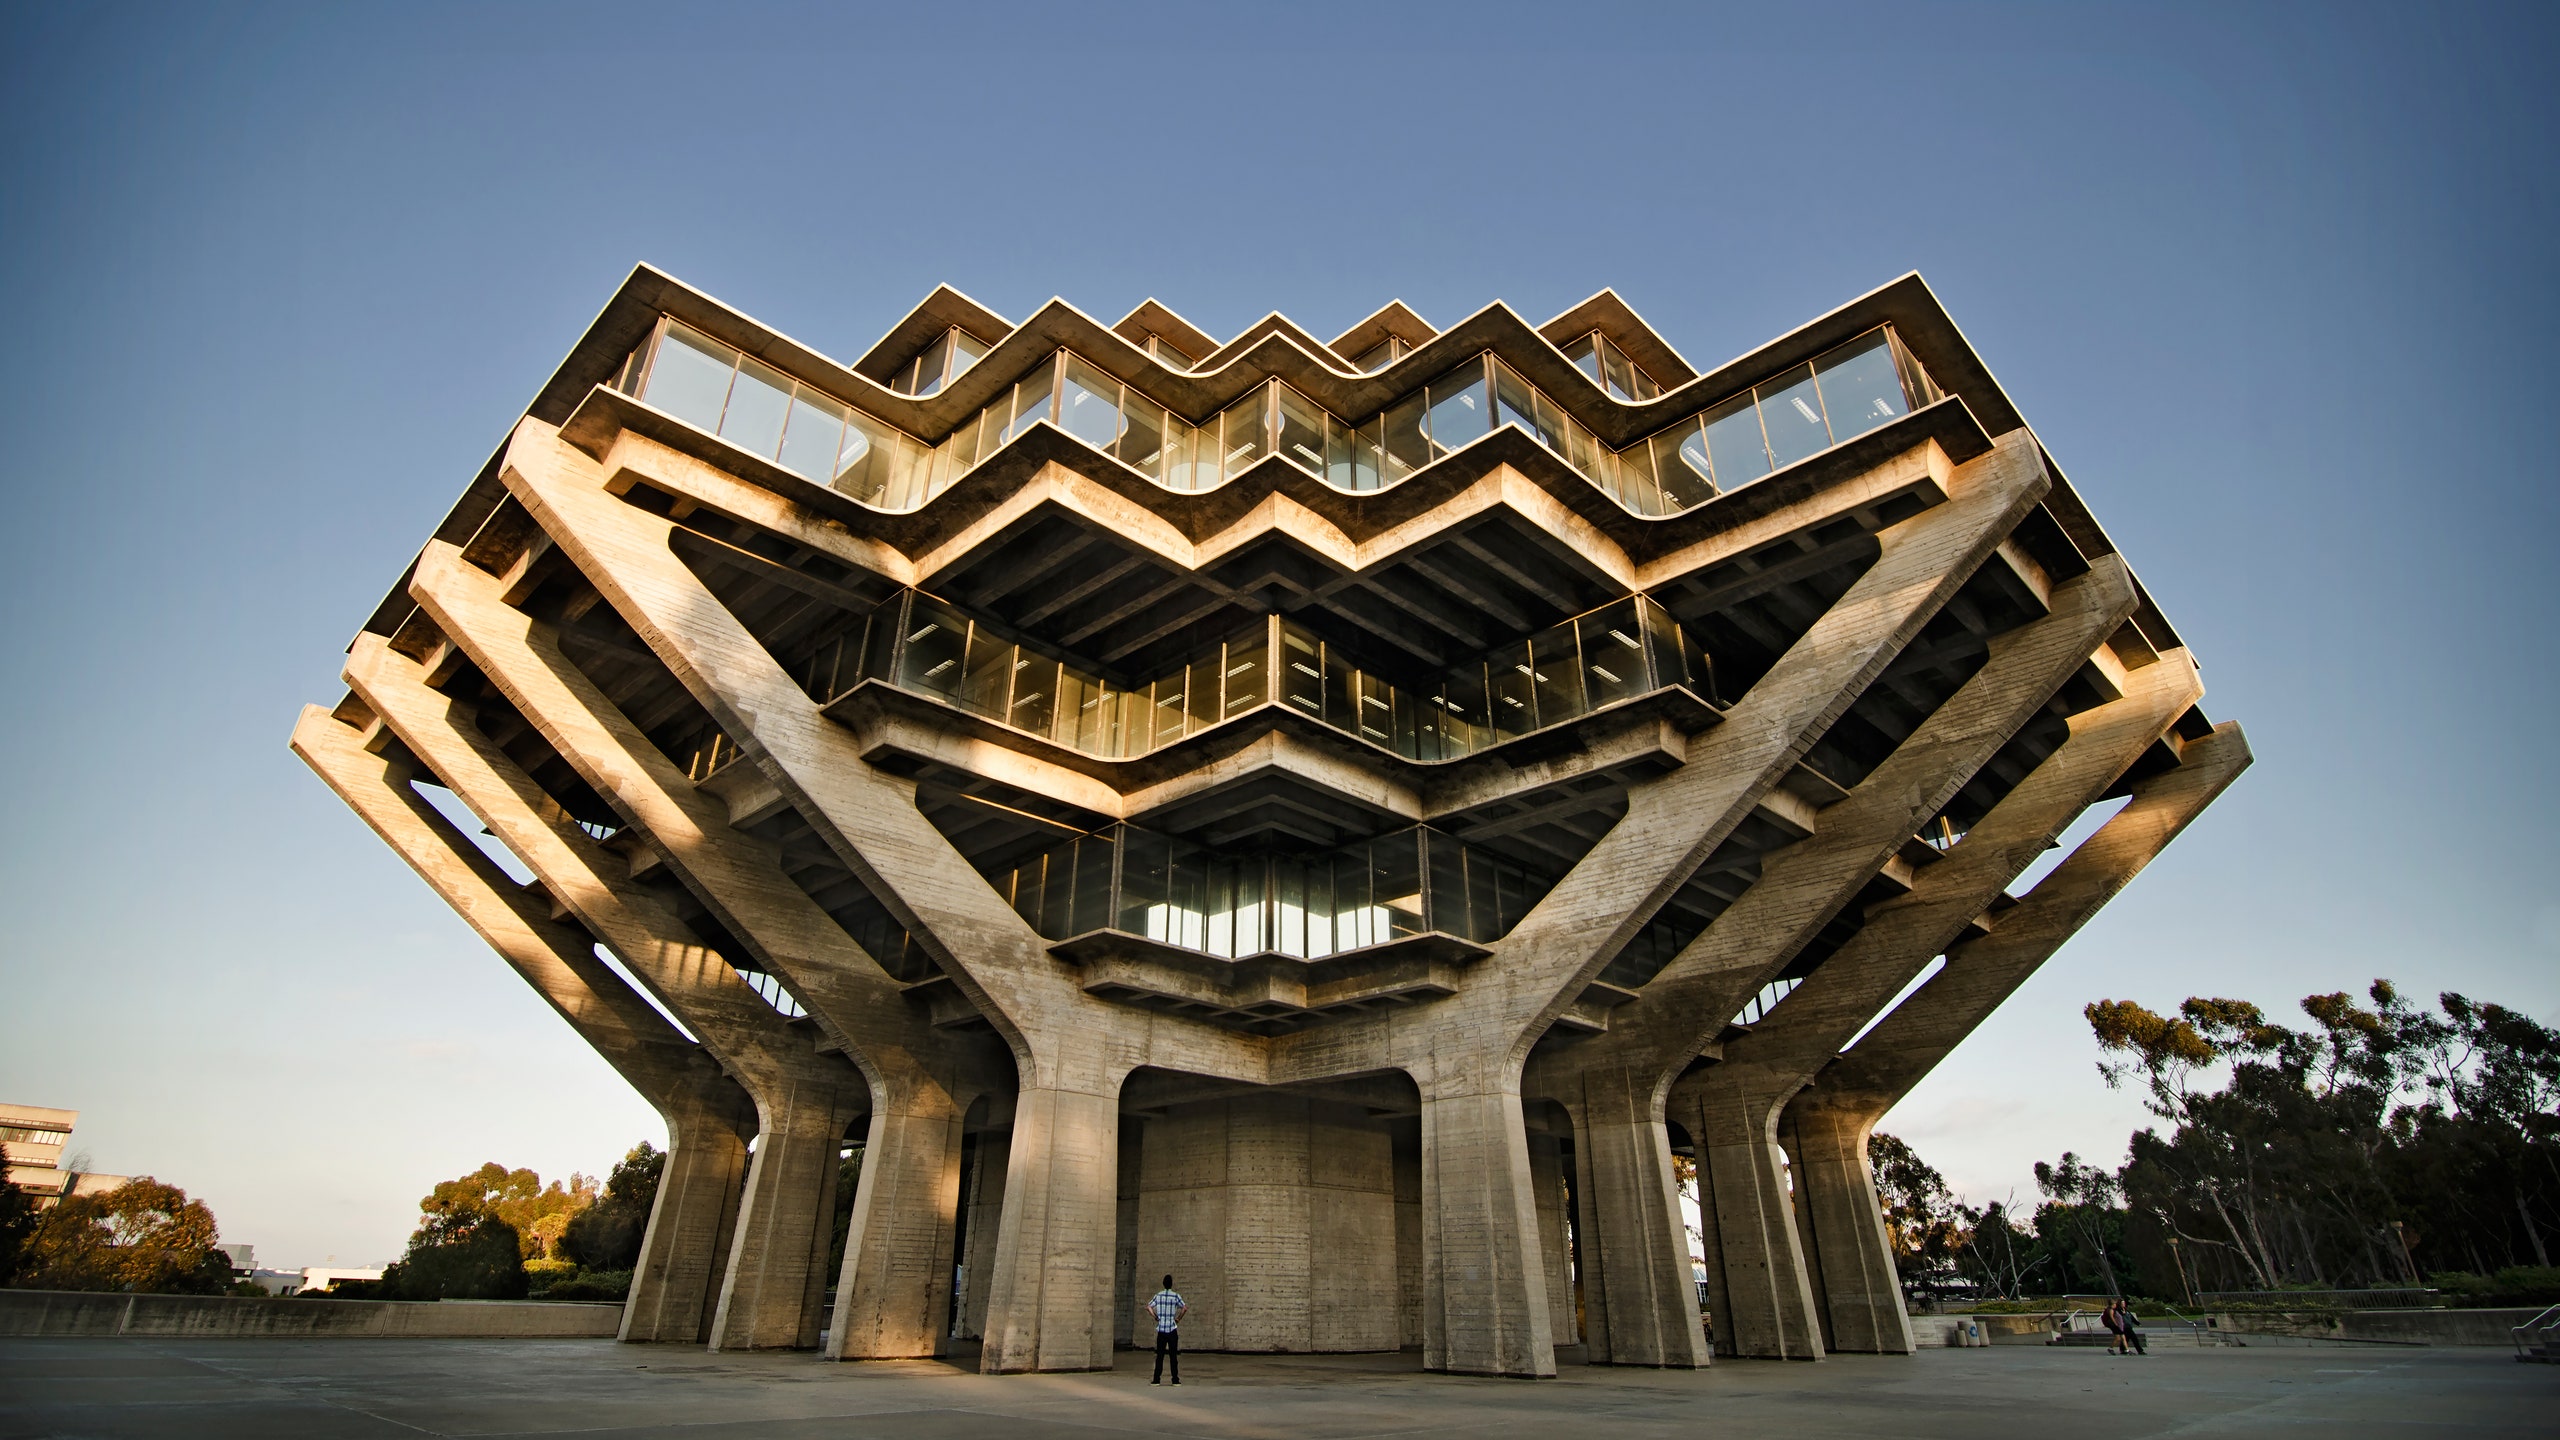 4. "Brutalism and Nails: A Study of Materiality in Art and Architecture" by John Doe - wide 7